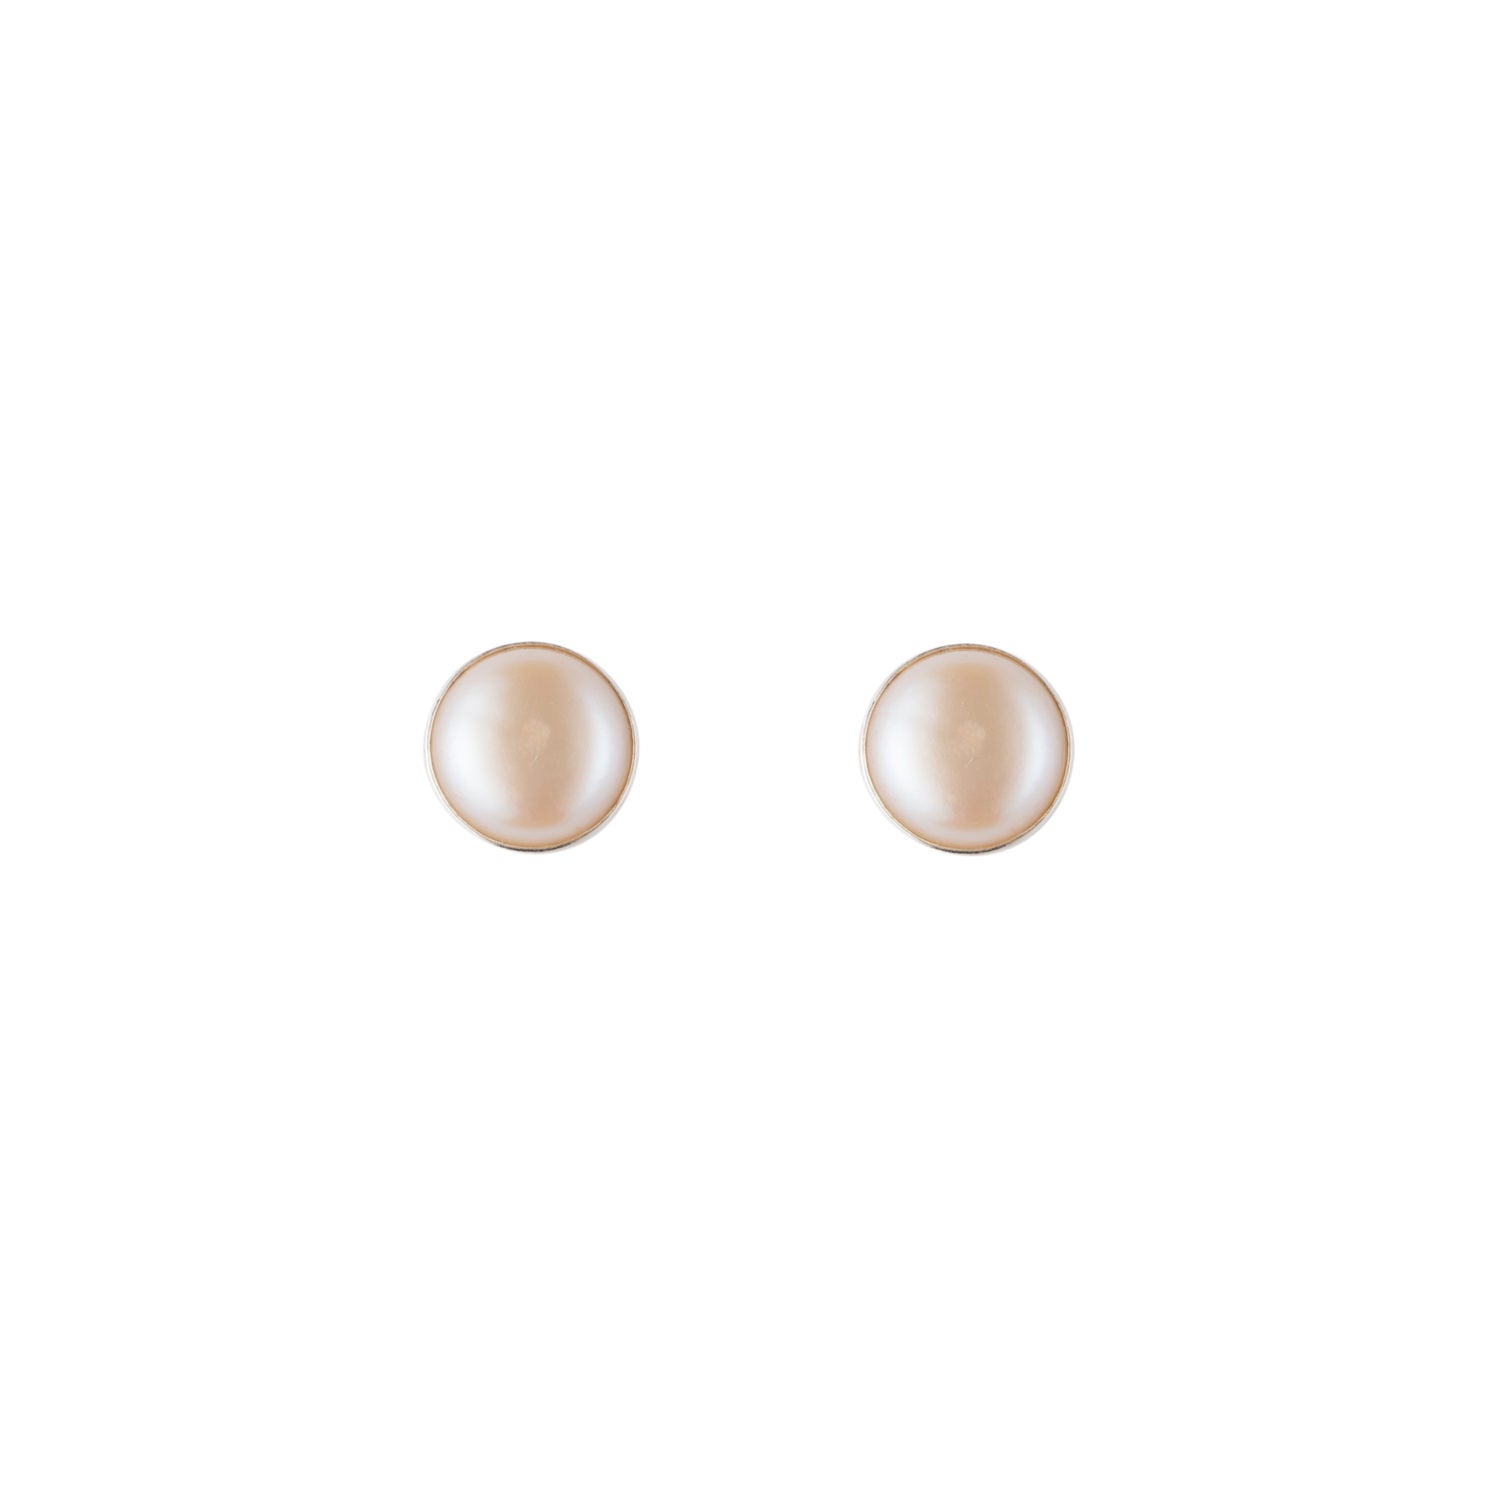 PEARL STUD EARRINGS - Sterling - Tarnished (needs to be polished)